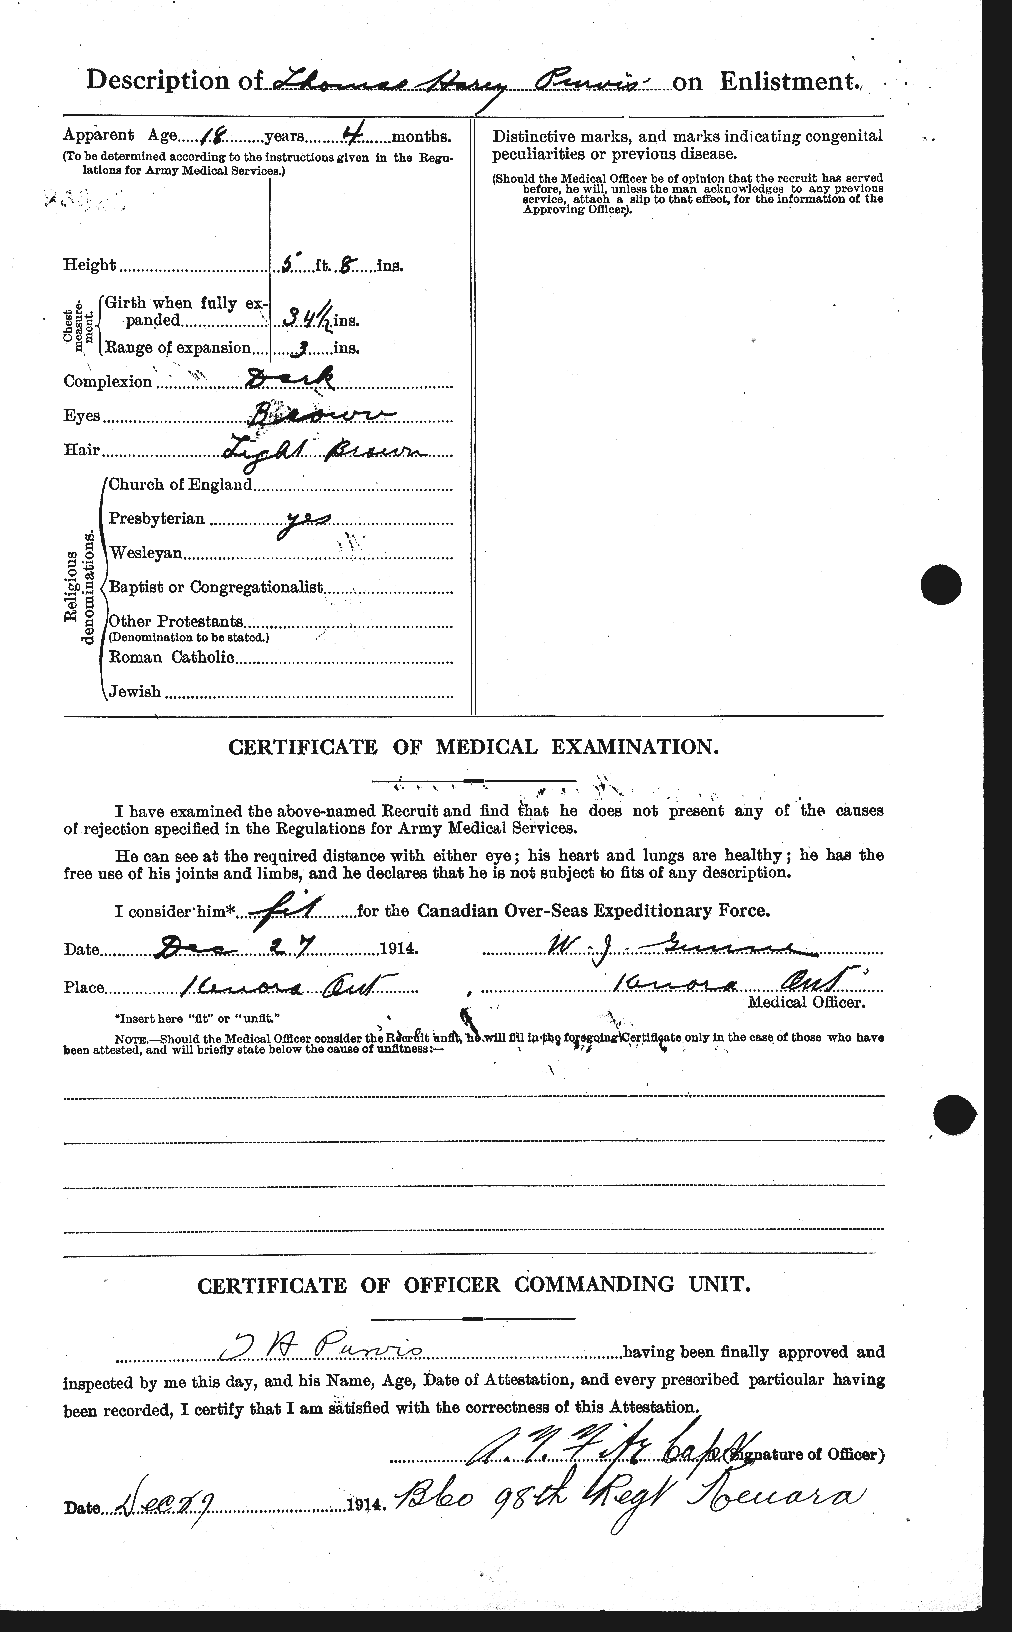 Personnel Records of the First World War - CEF 590014b